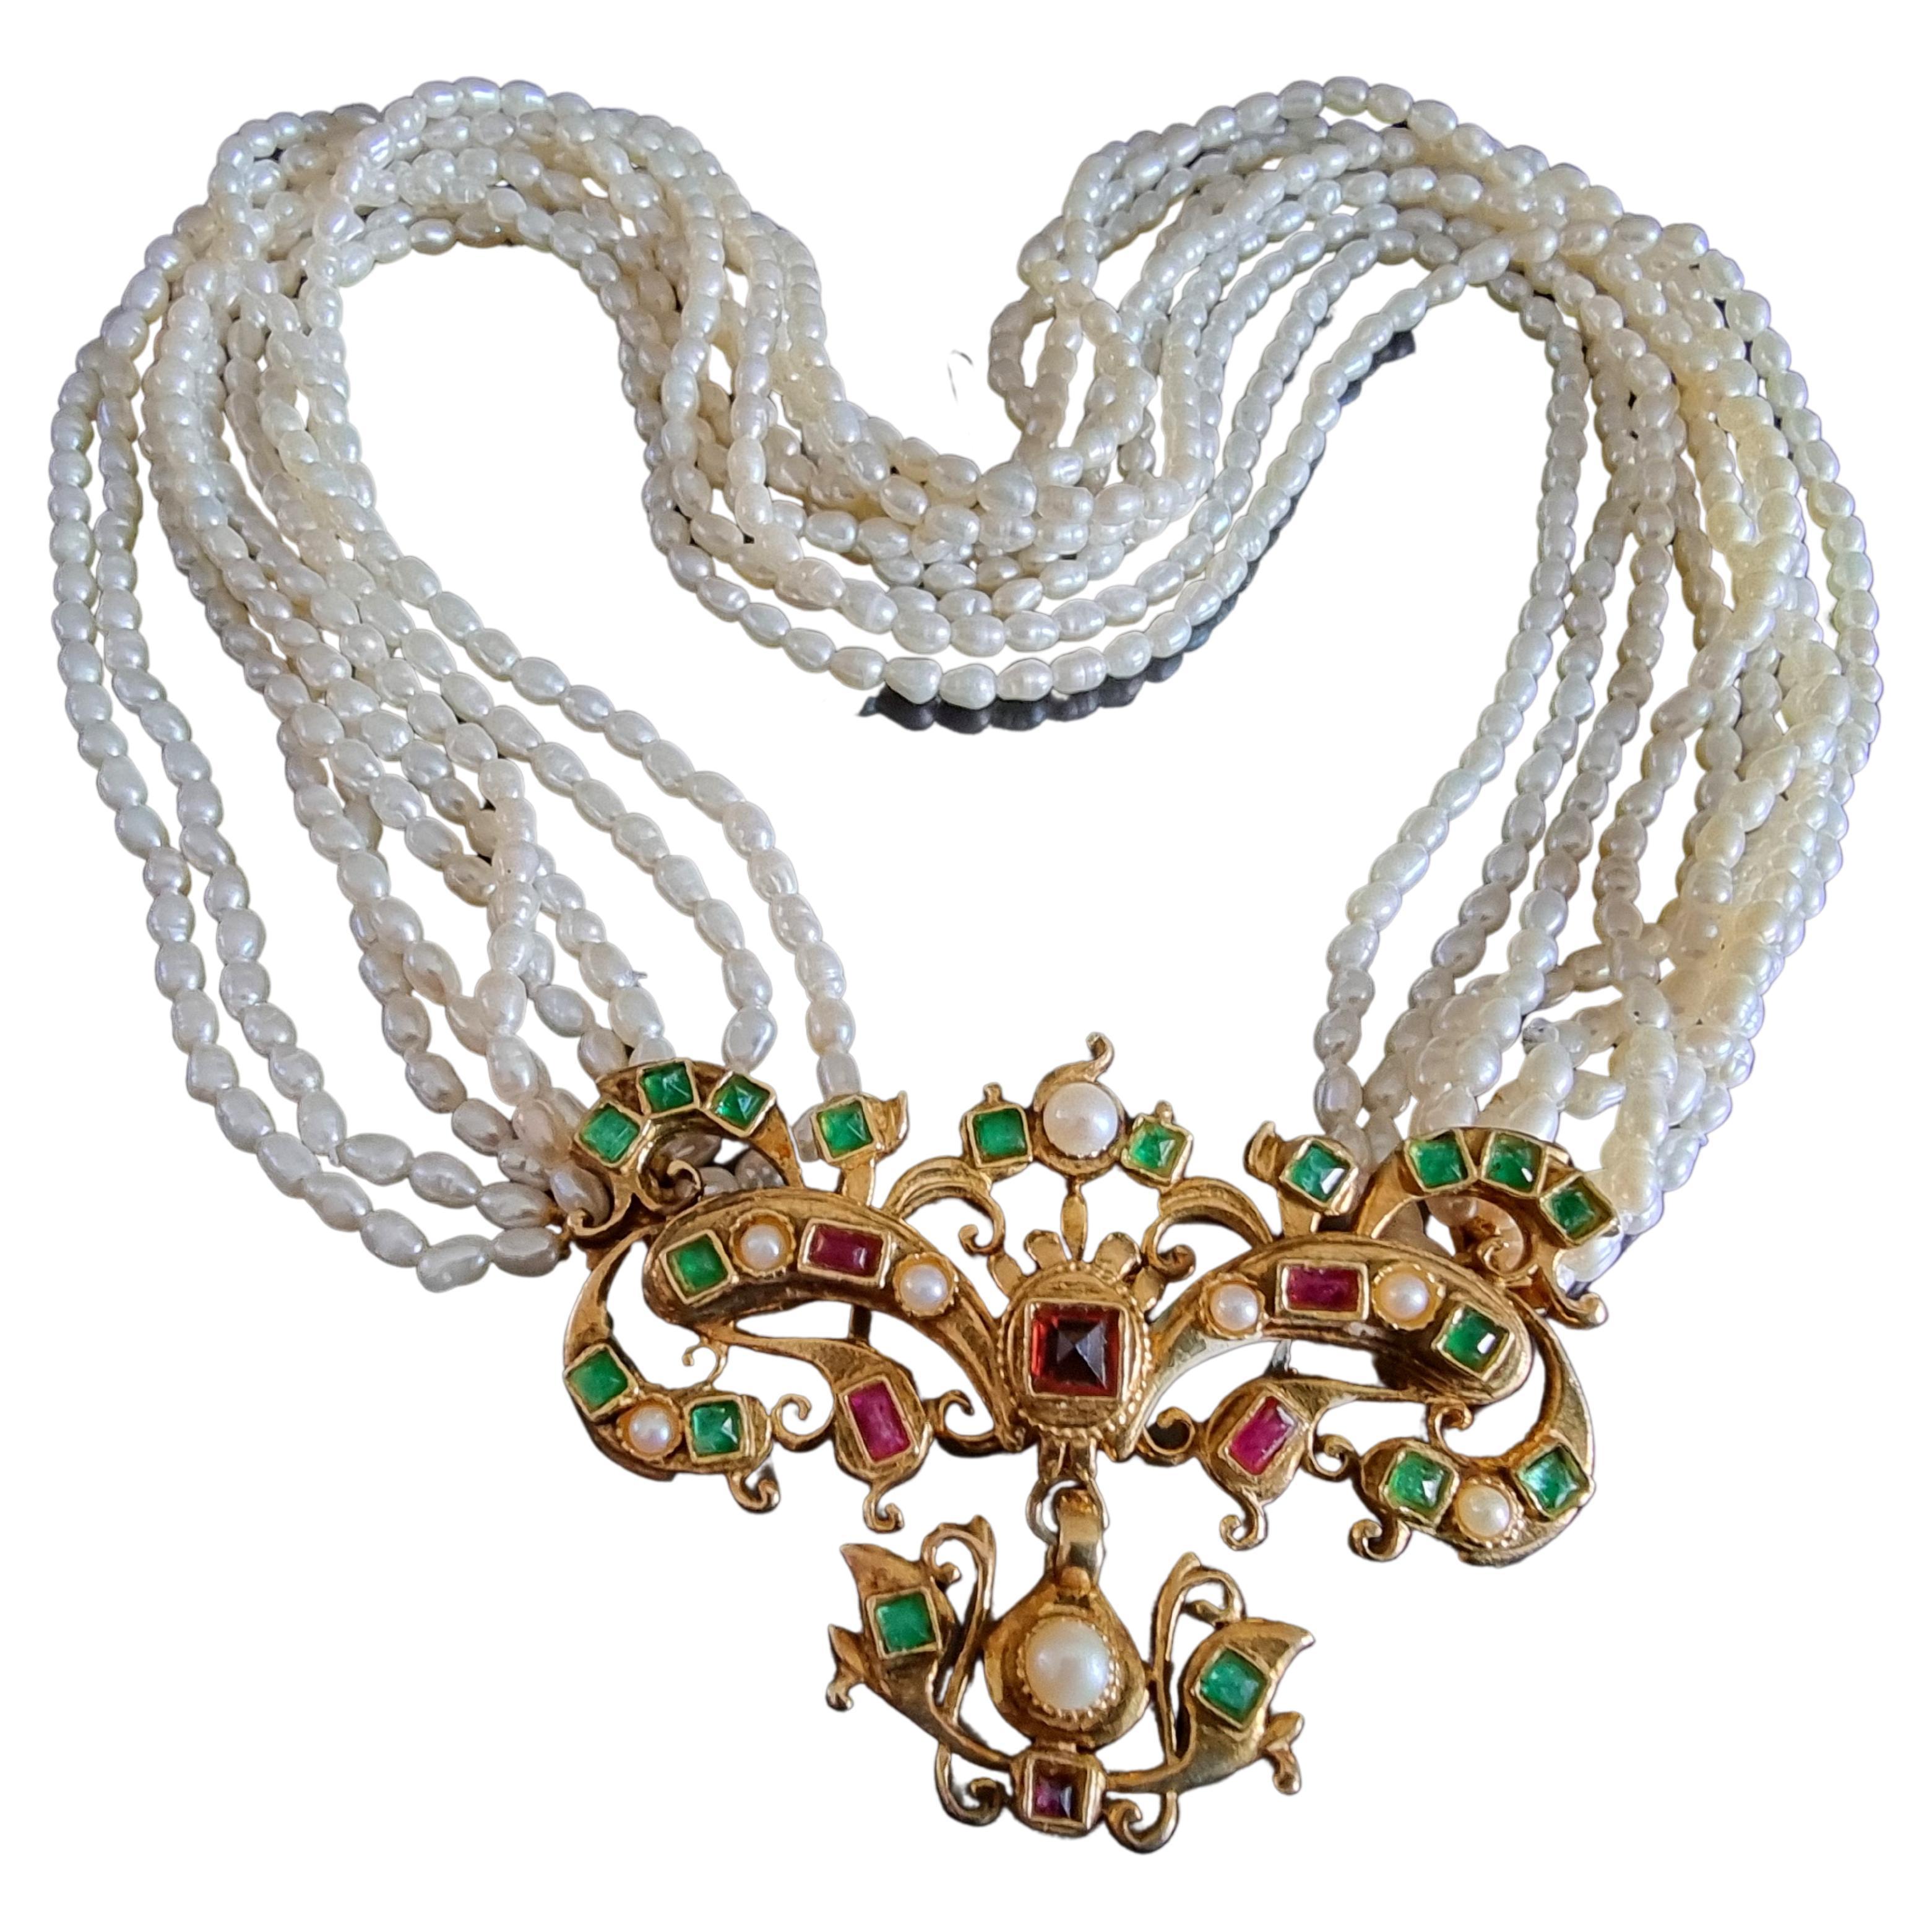 Magnificent NECKLACE vintage pearls, High Fashion, vermeil, 18th century style For Sale